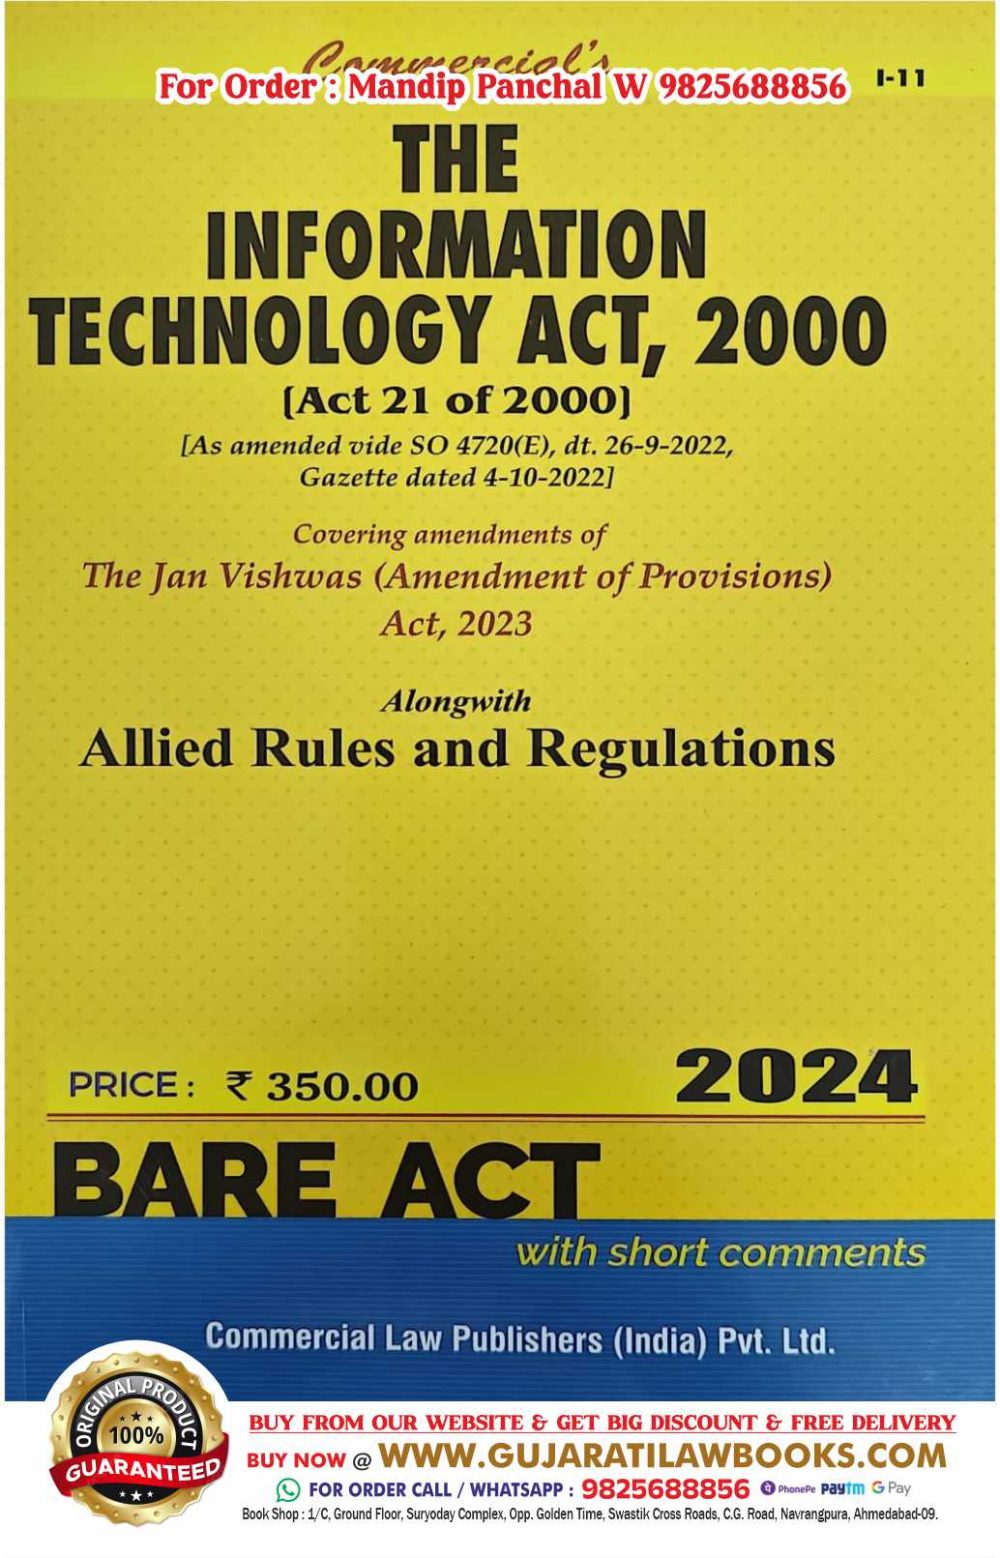 Information Technology Act, 2000 - Cyber Law - BARE ACT - Latest 2024 Edition Commercial